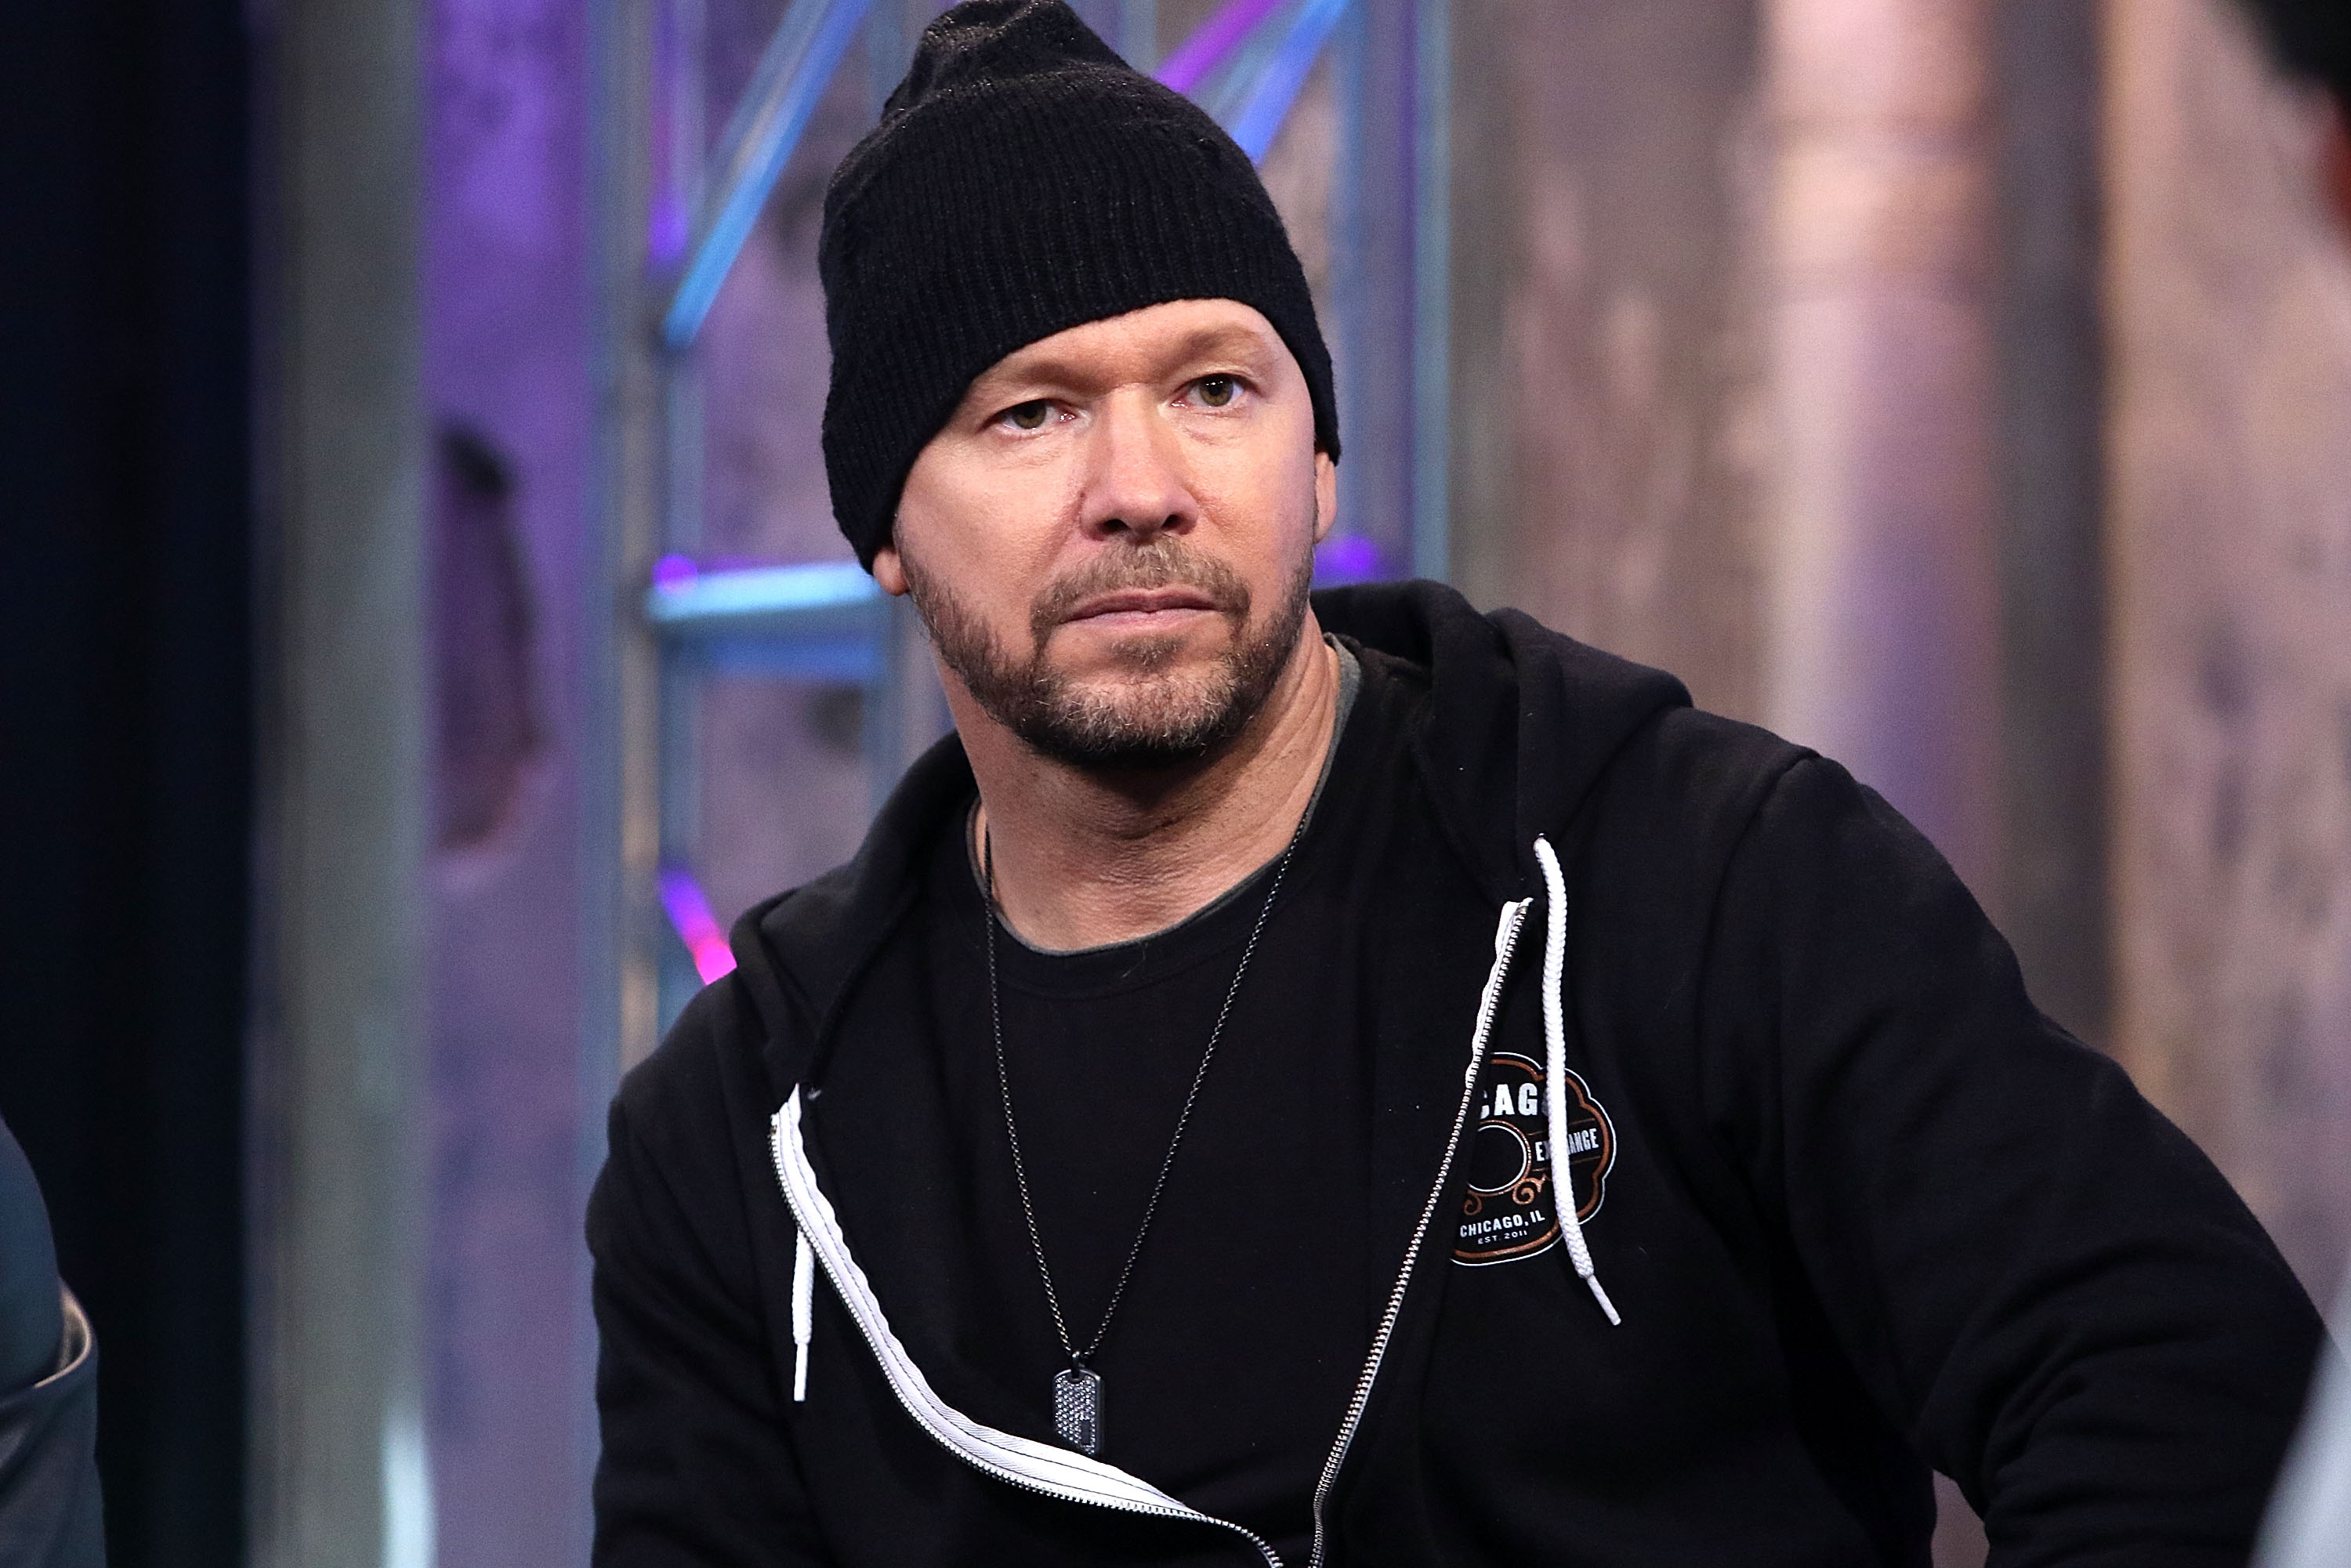 Donnie Wahlberg attends the AOL Build Speaker Series on June 9, 2016 at AOL Studios, New York City. | Photo: Getty Images